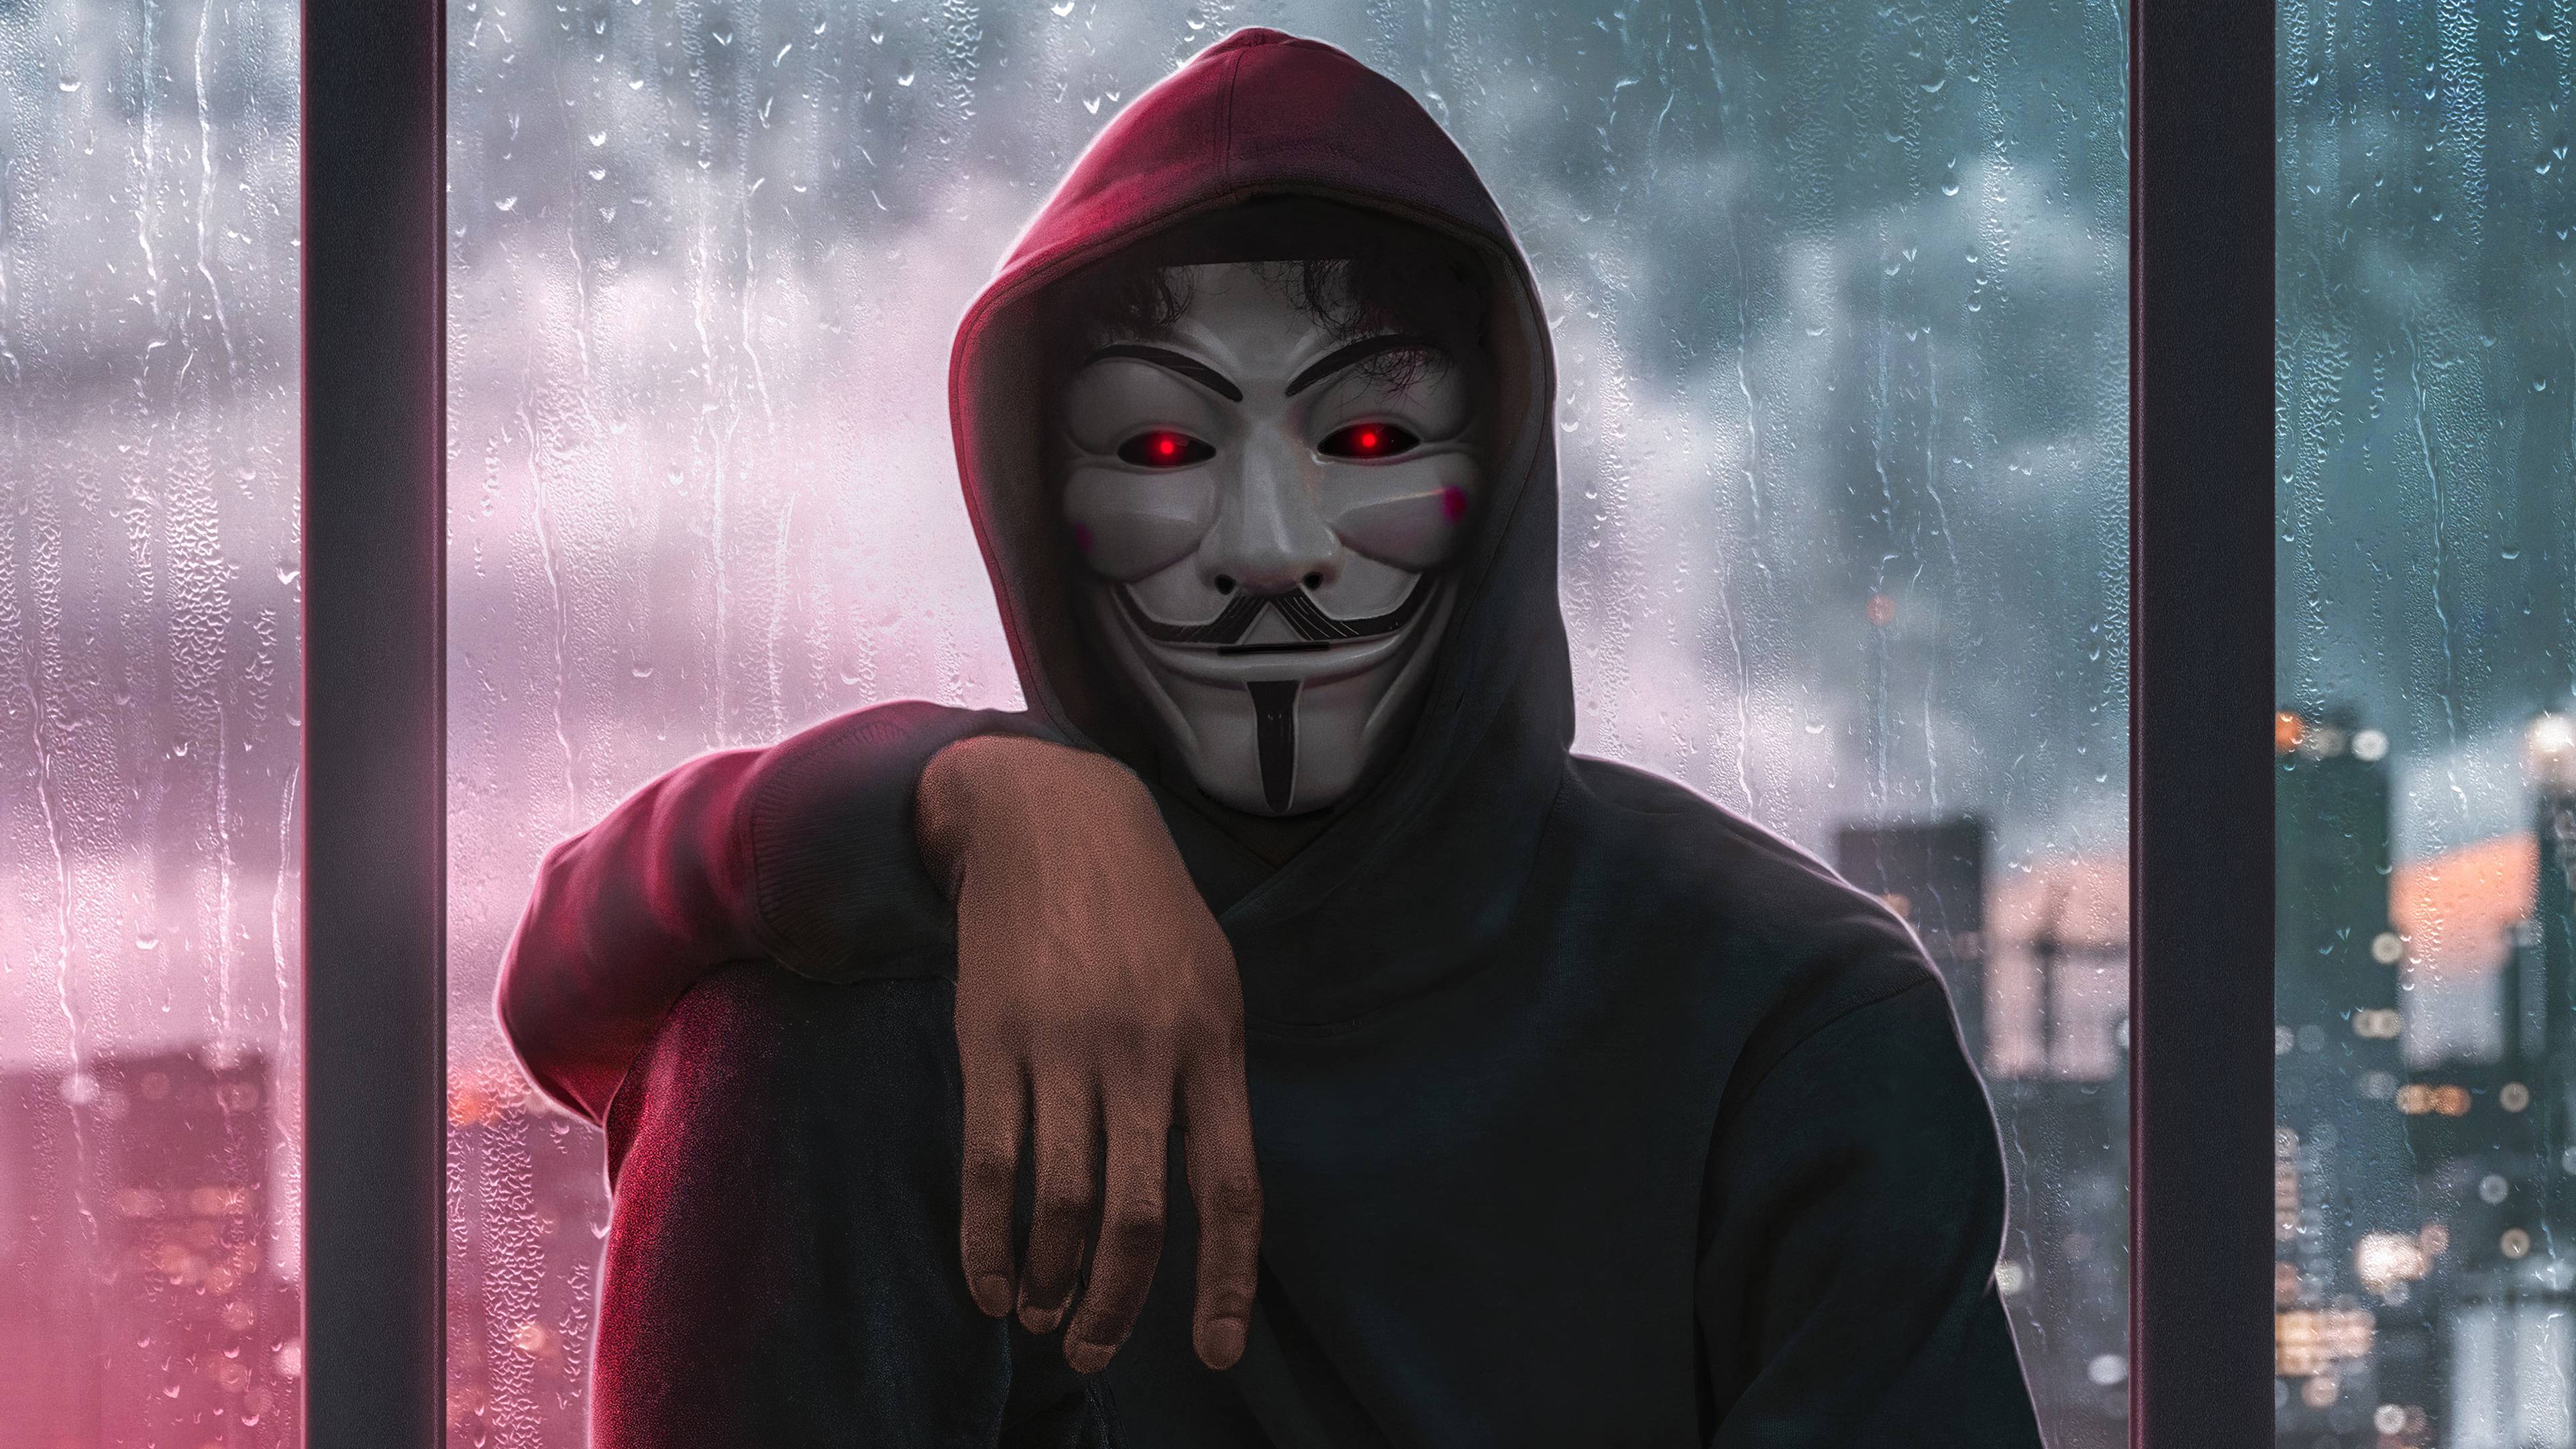 Anonymous PC Wallpapers - Top Free Anonymous PC Backgrounds -  WallpaperAccess